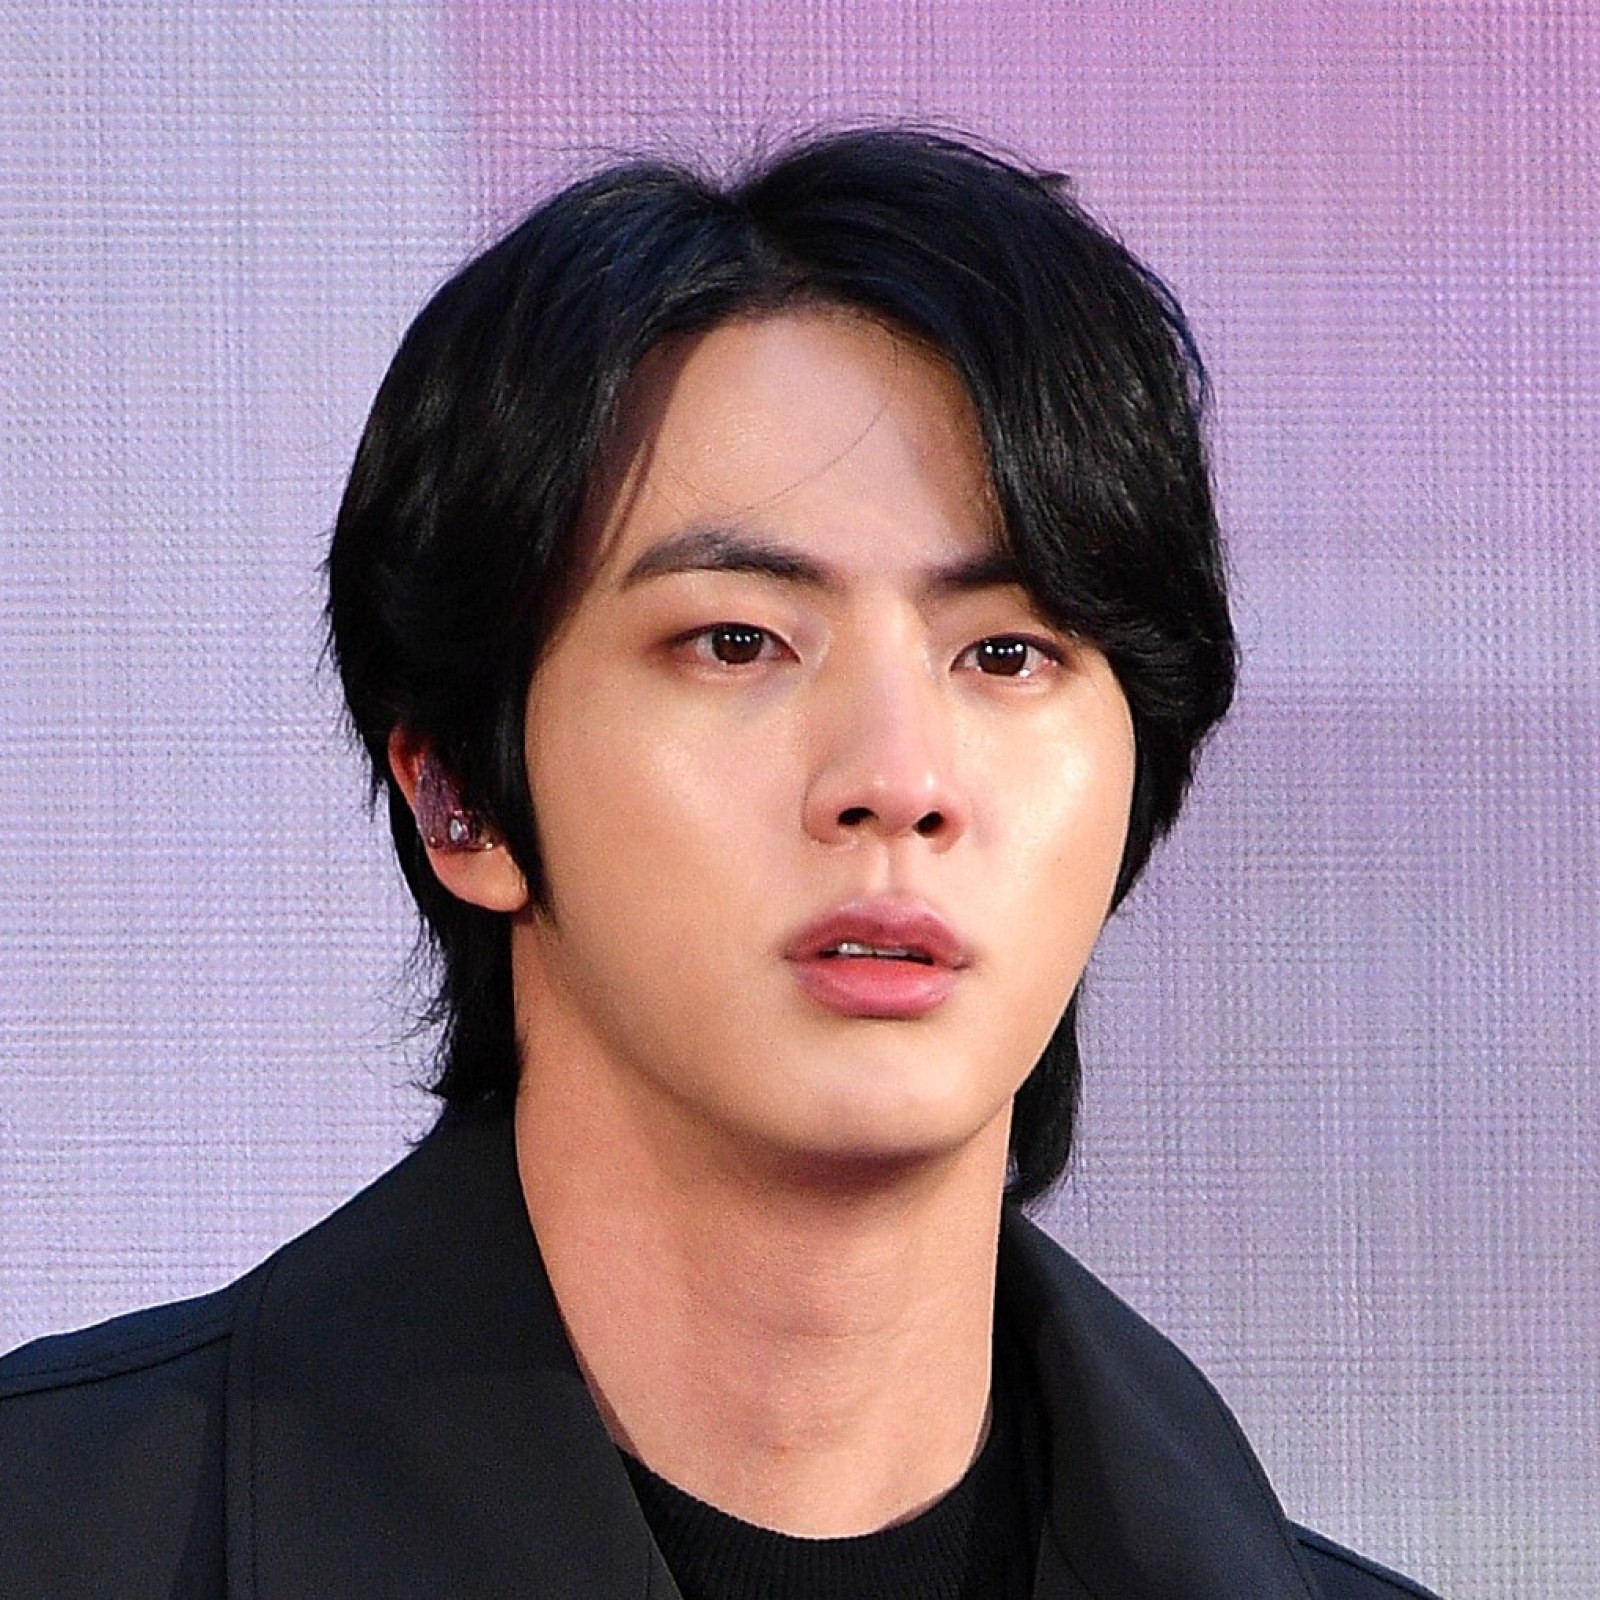 New Details About Bts' Jin's Military Enlistment Released—Full Statement